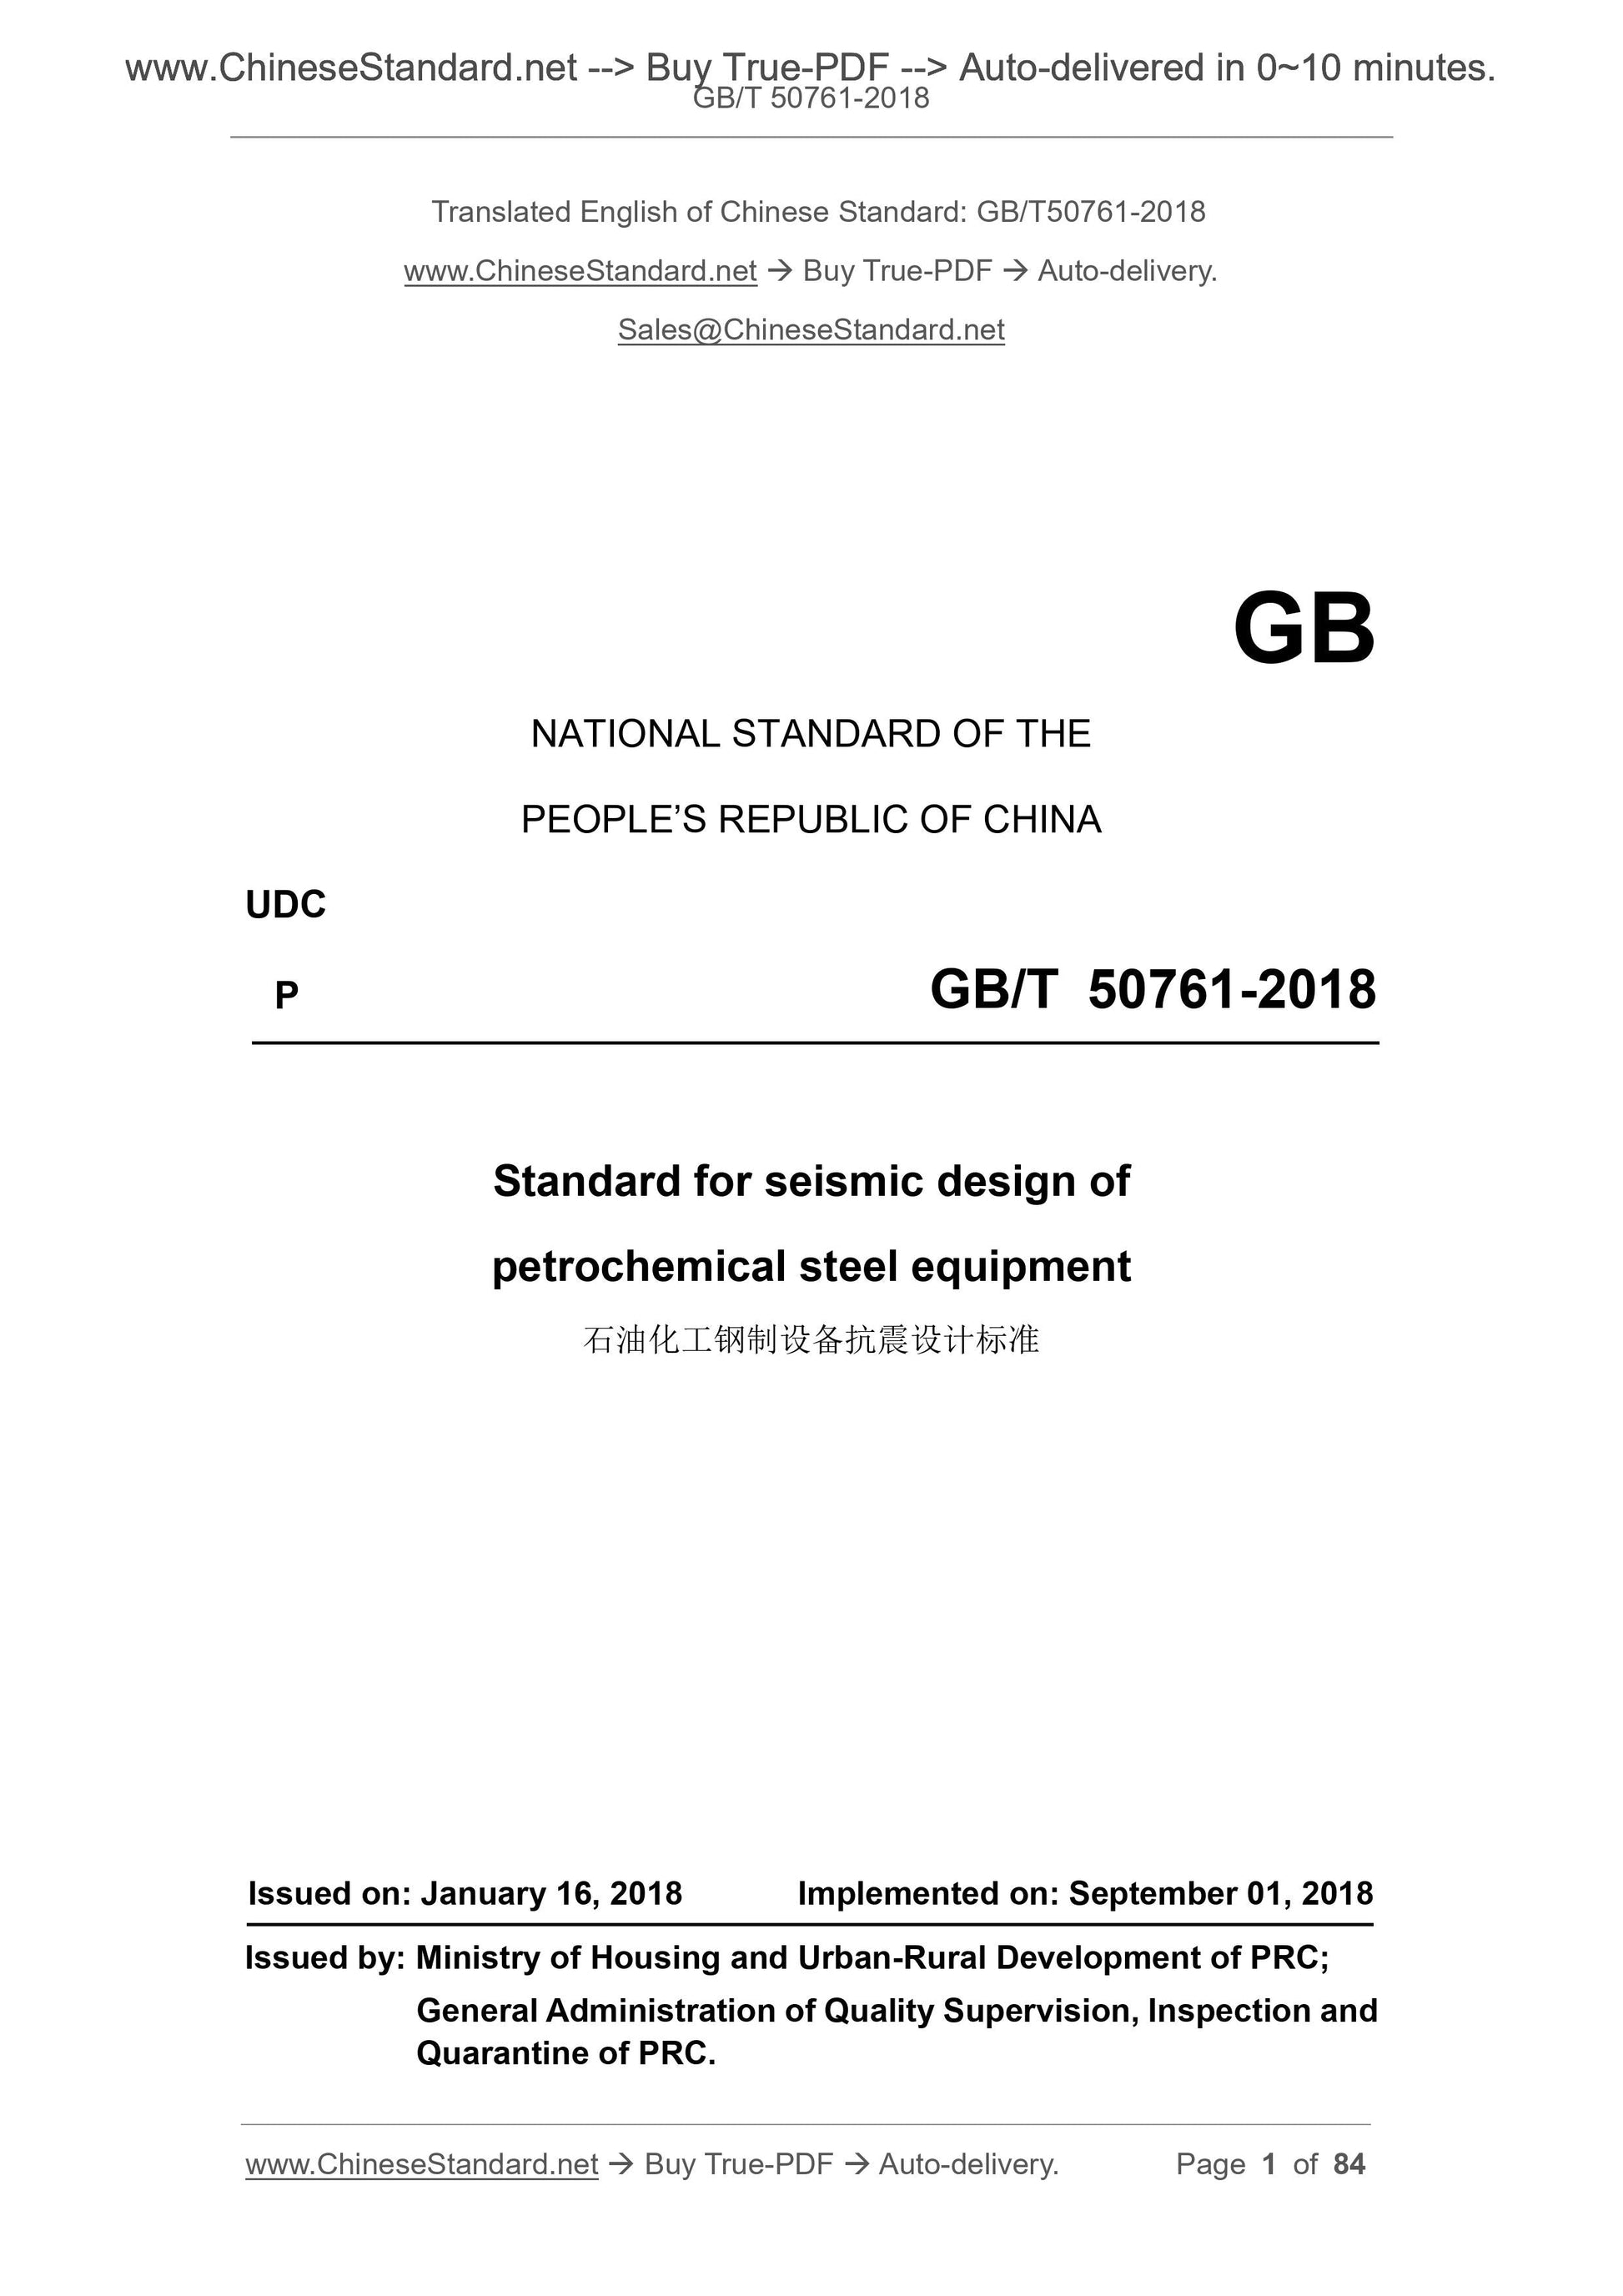 GB/T 50761-2018 Page 1